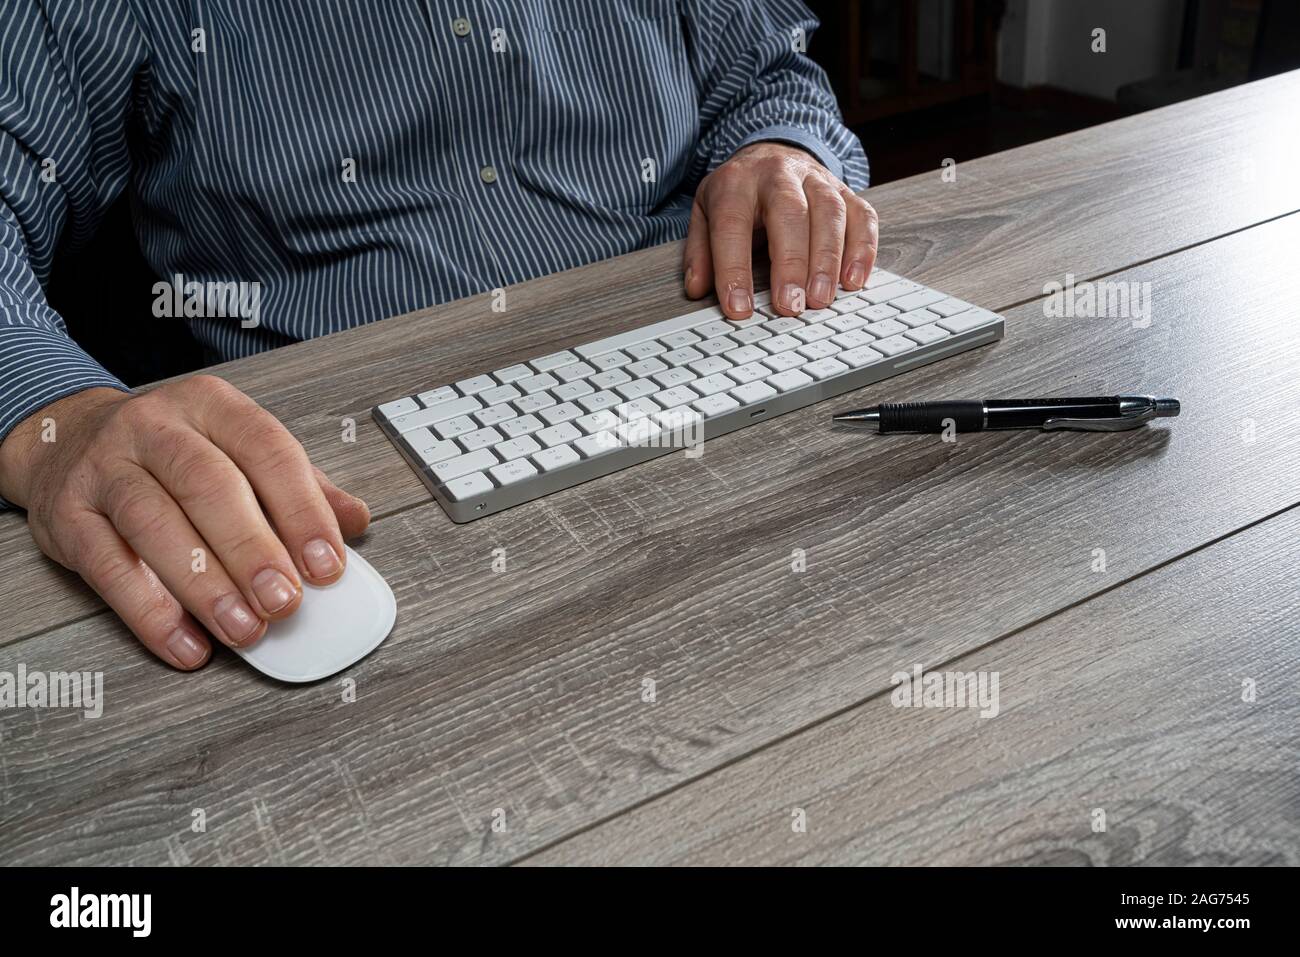 a man at work in front of a computer keyboard Stock Photo